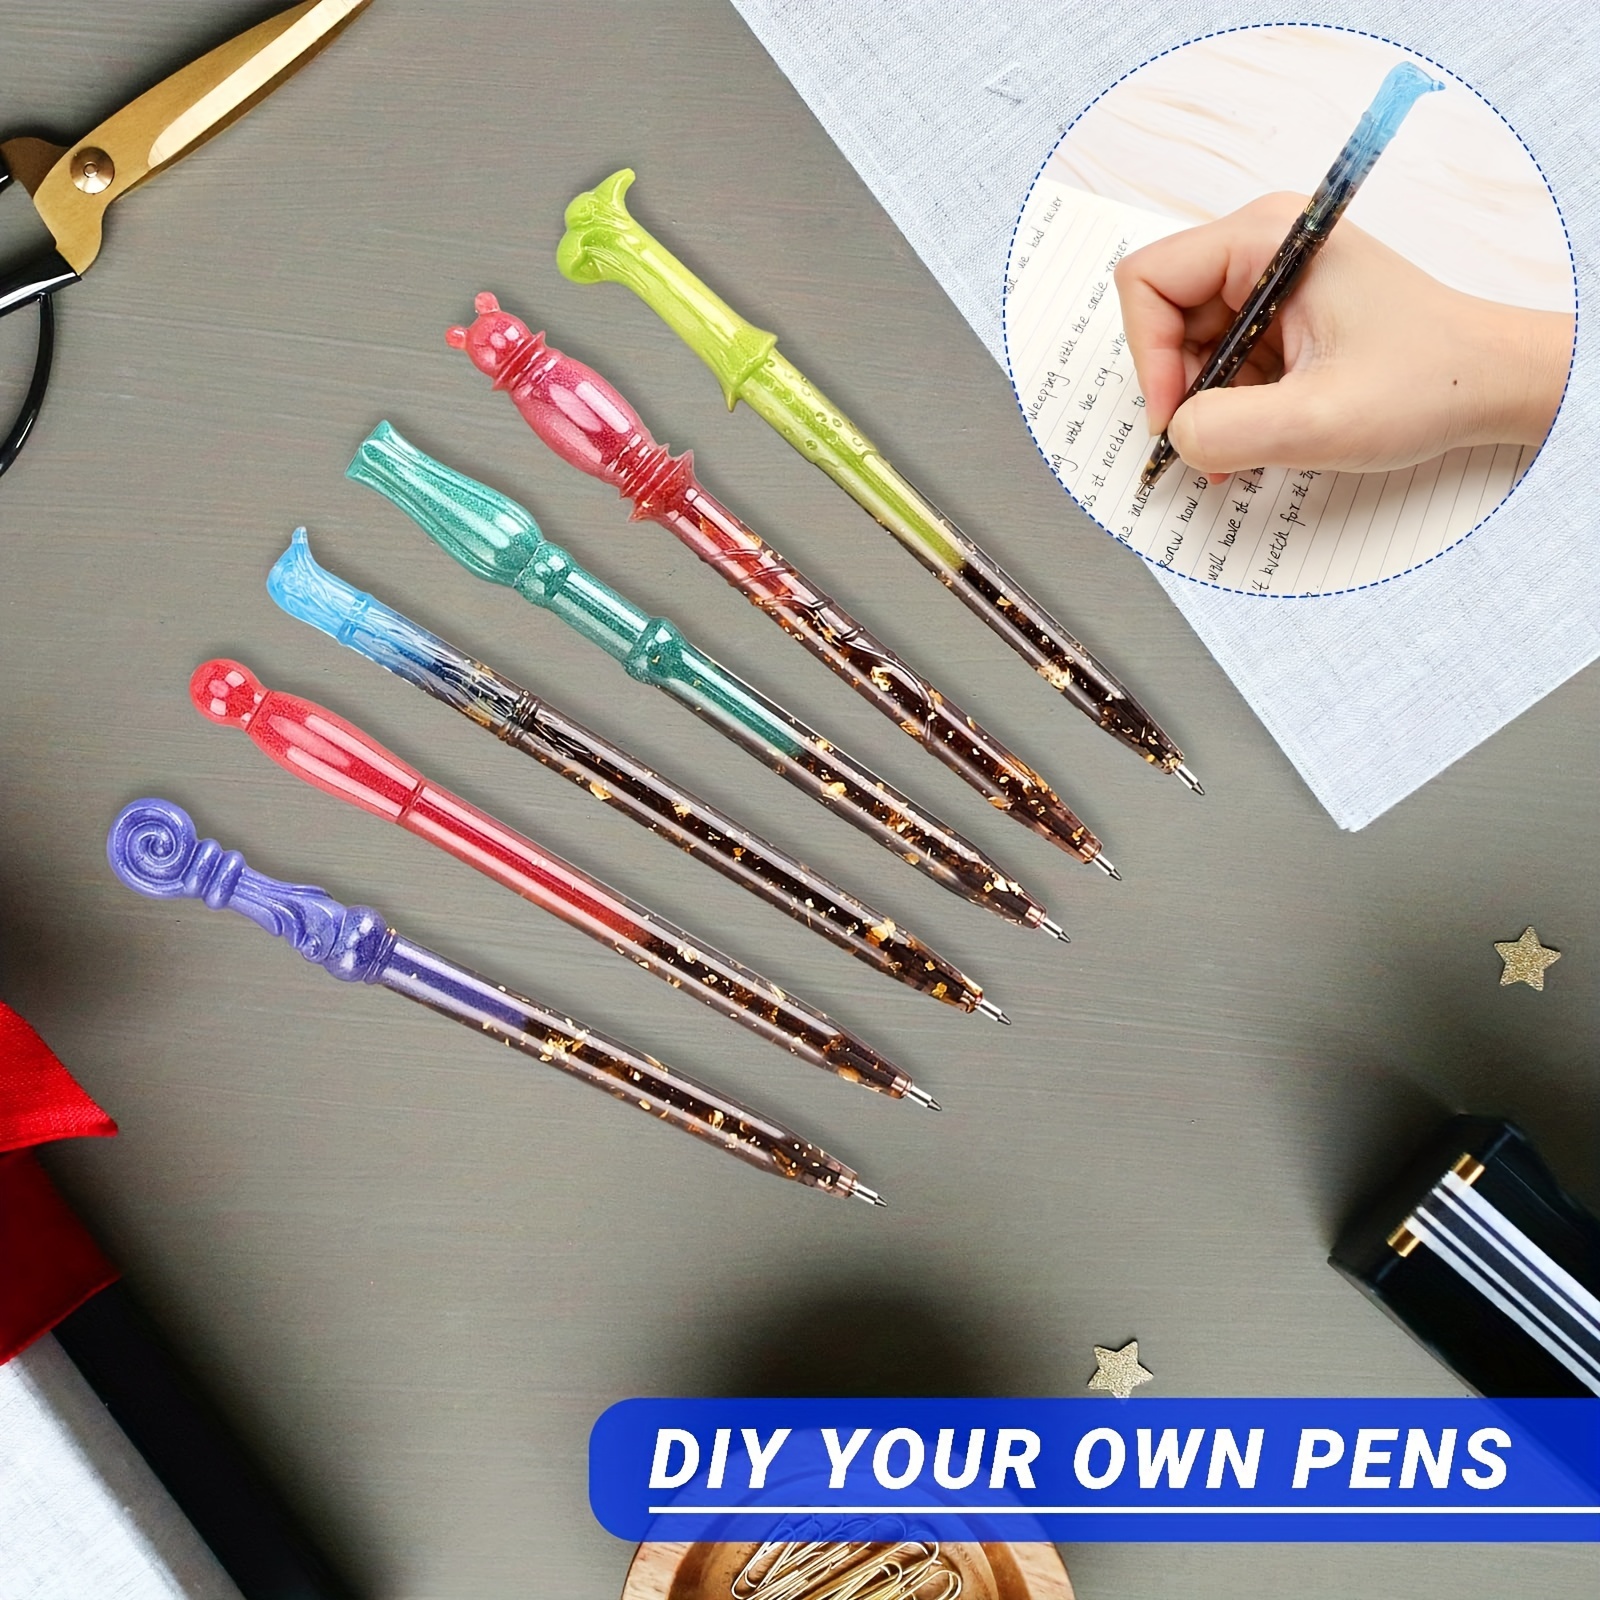 Weenkeey 6 Pcs Pen Resin Molds Ballpoint Pen Silicone Mold Pen Shape Resin  Casting Molds with 10 Pcs Ink Pen Refills for DIY Pen Crafts